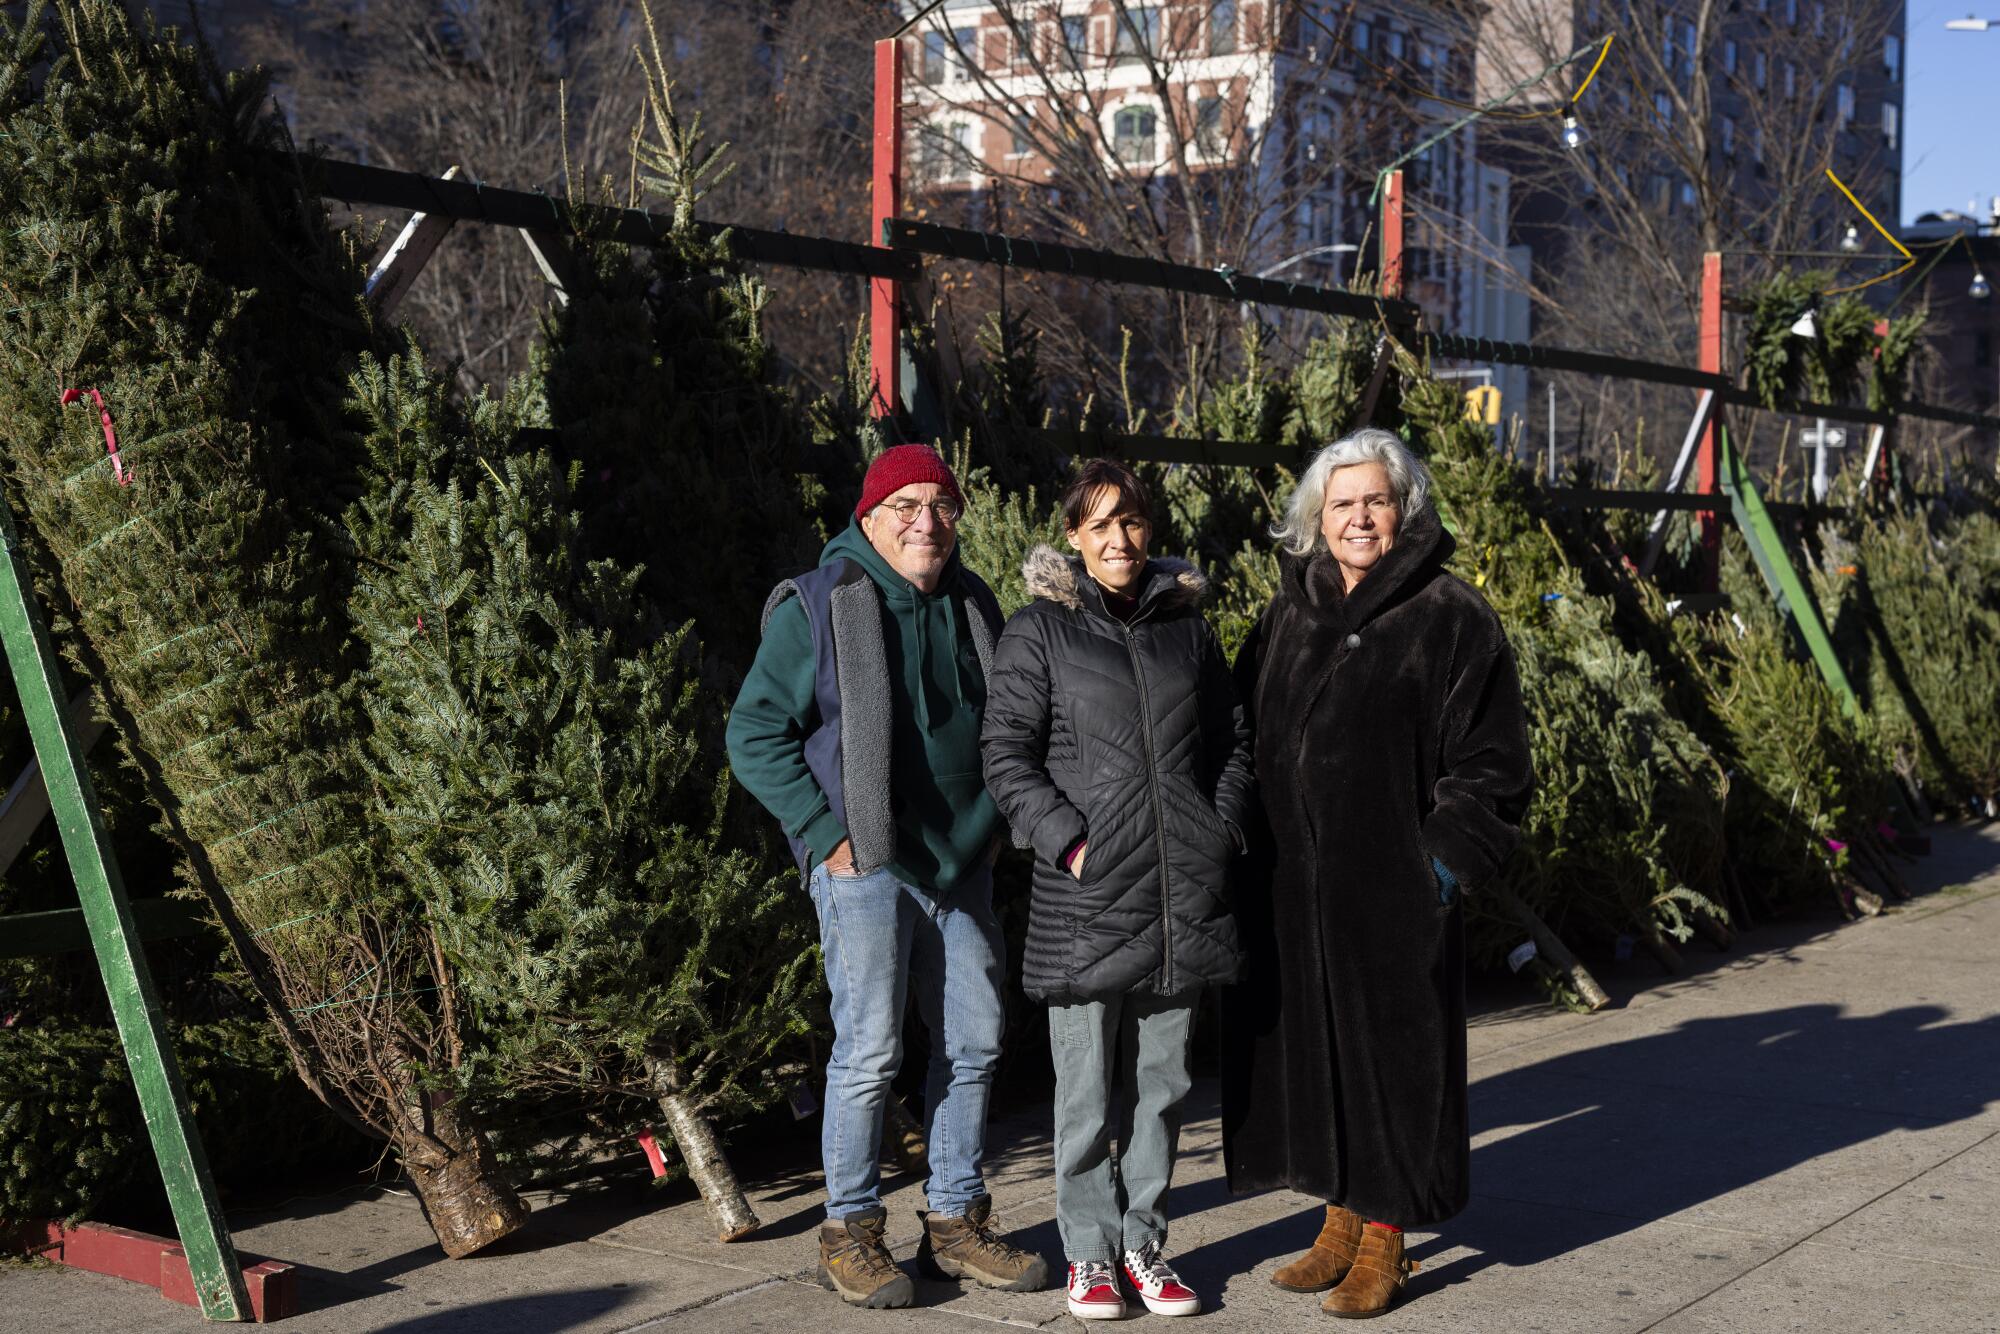 Three people stand in front of a row of cut Christmas trees.